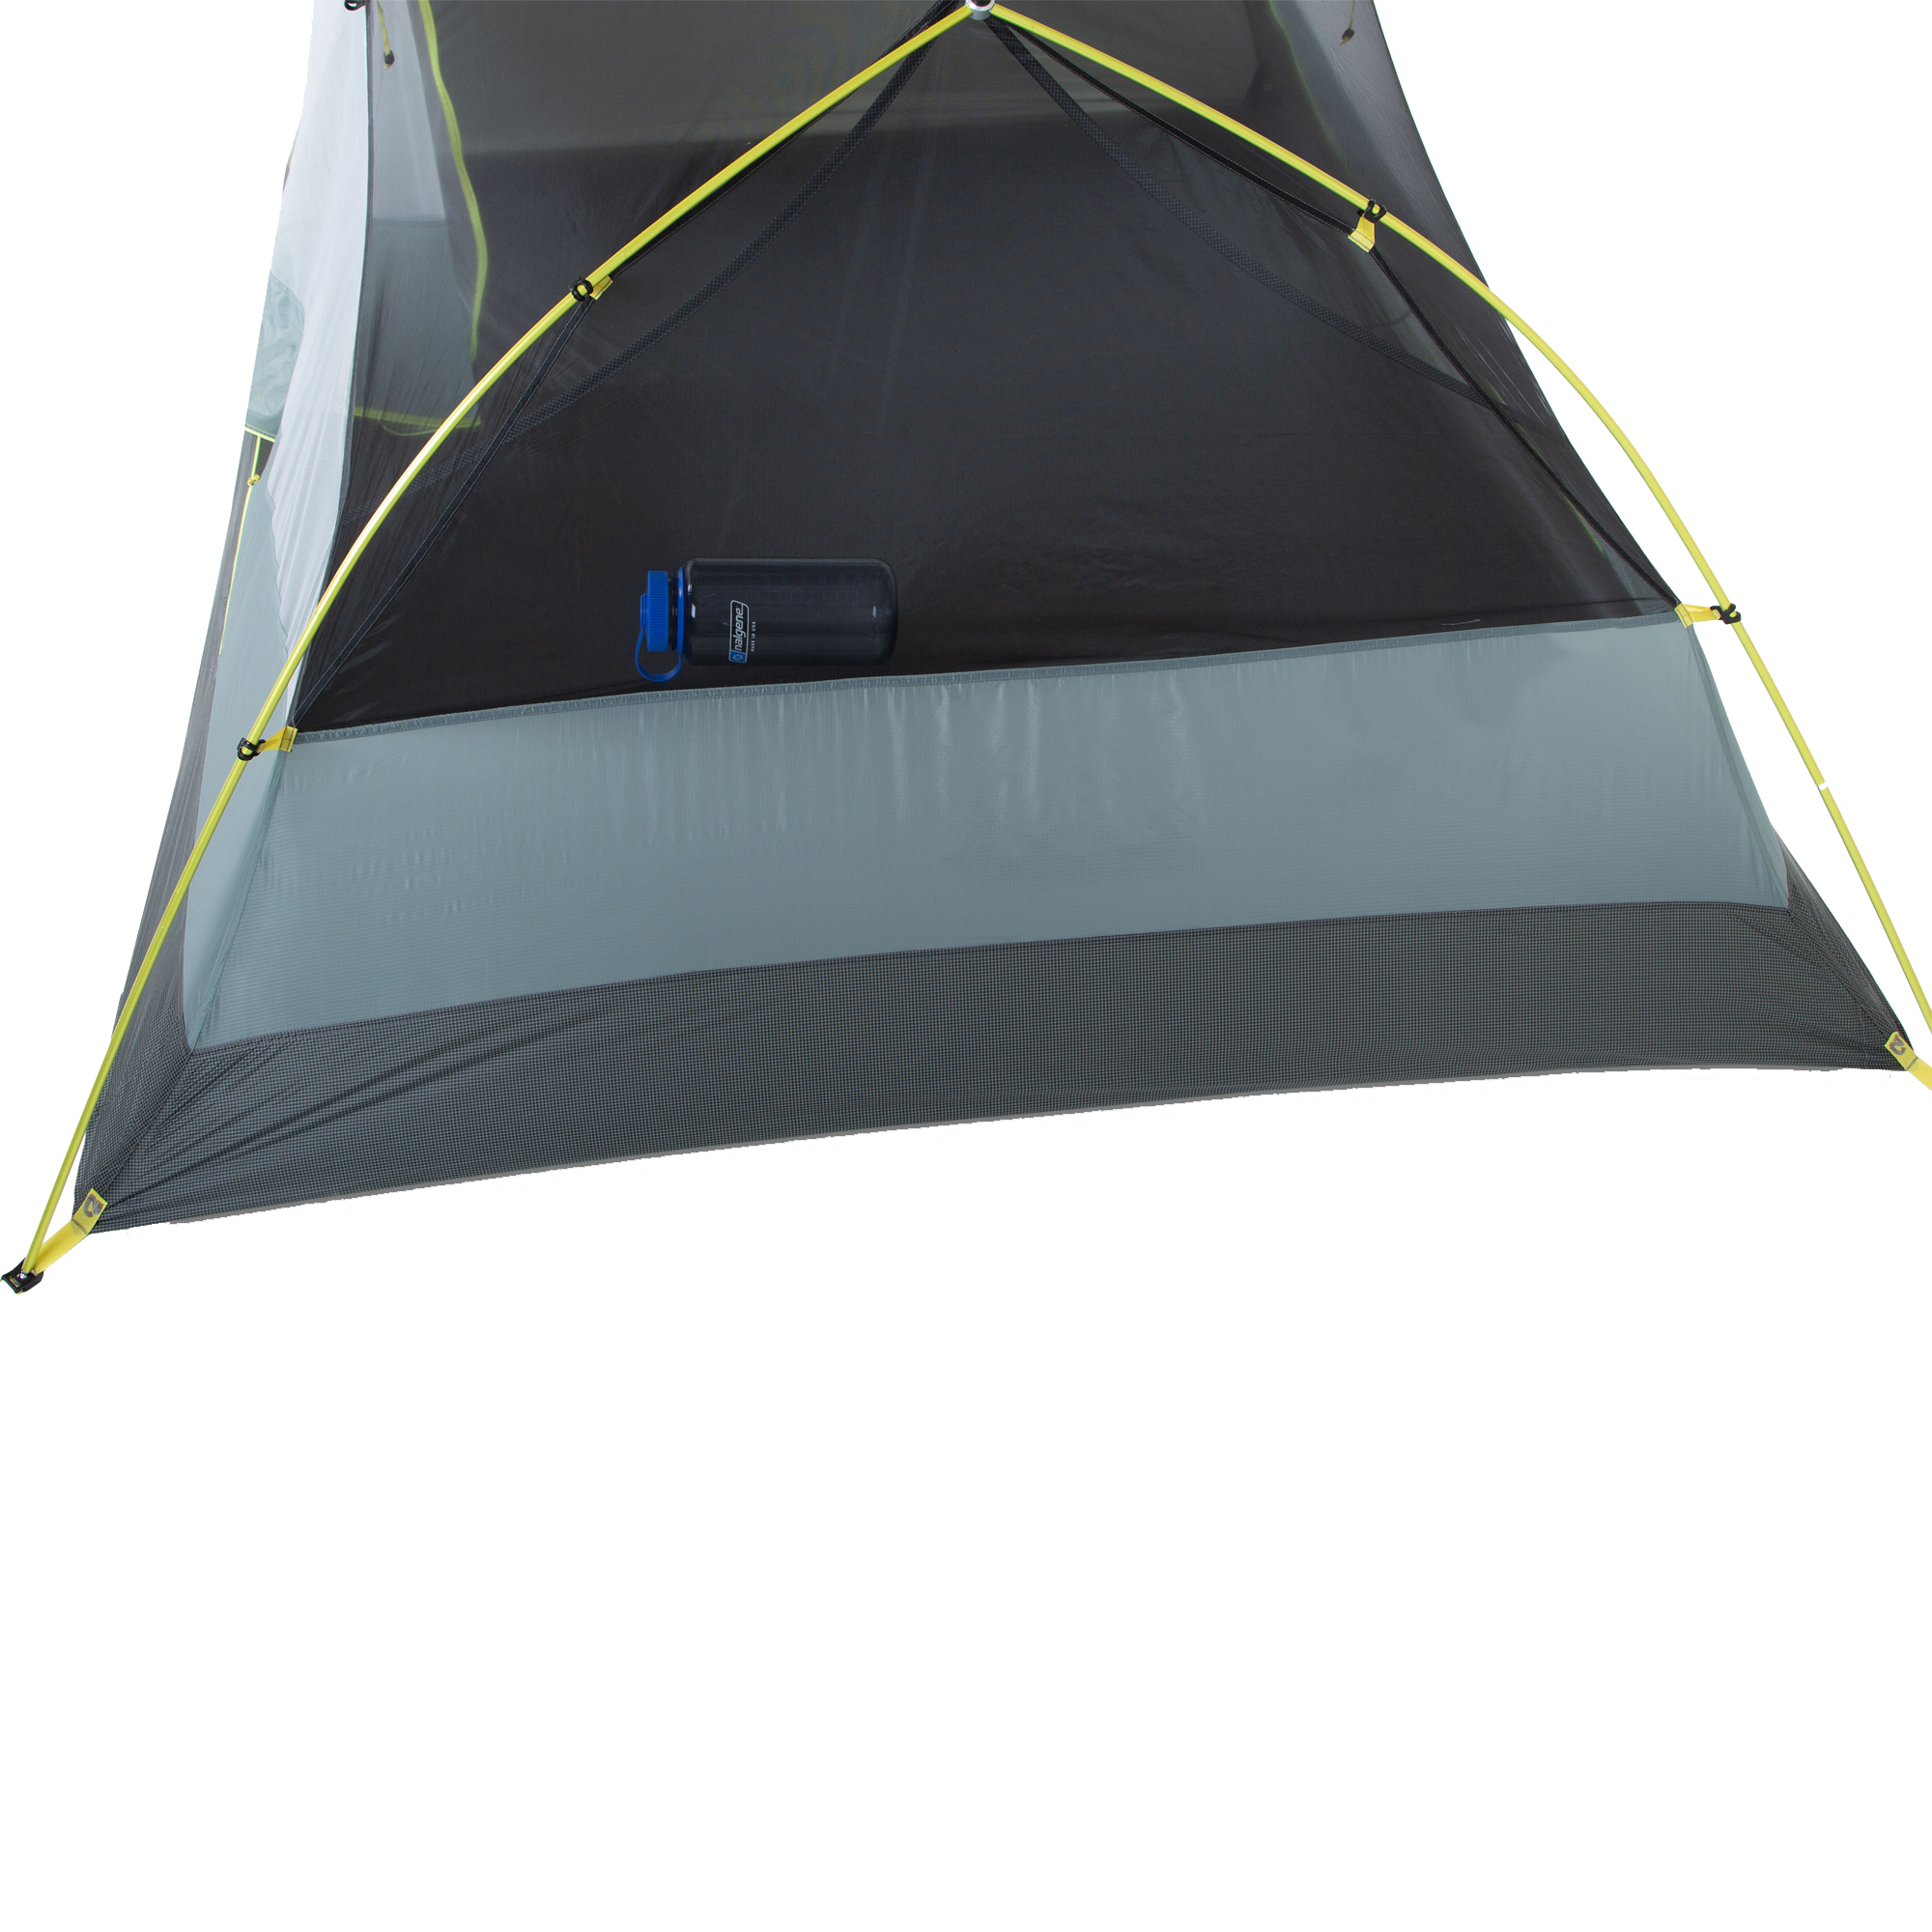 Nemo Dragonfly OSMO 3 Ultralight Backpacking Tent